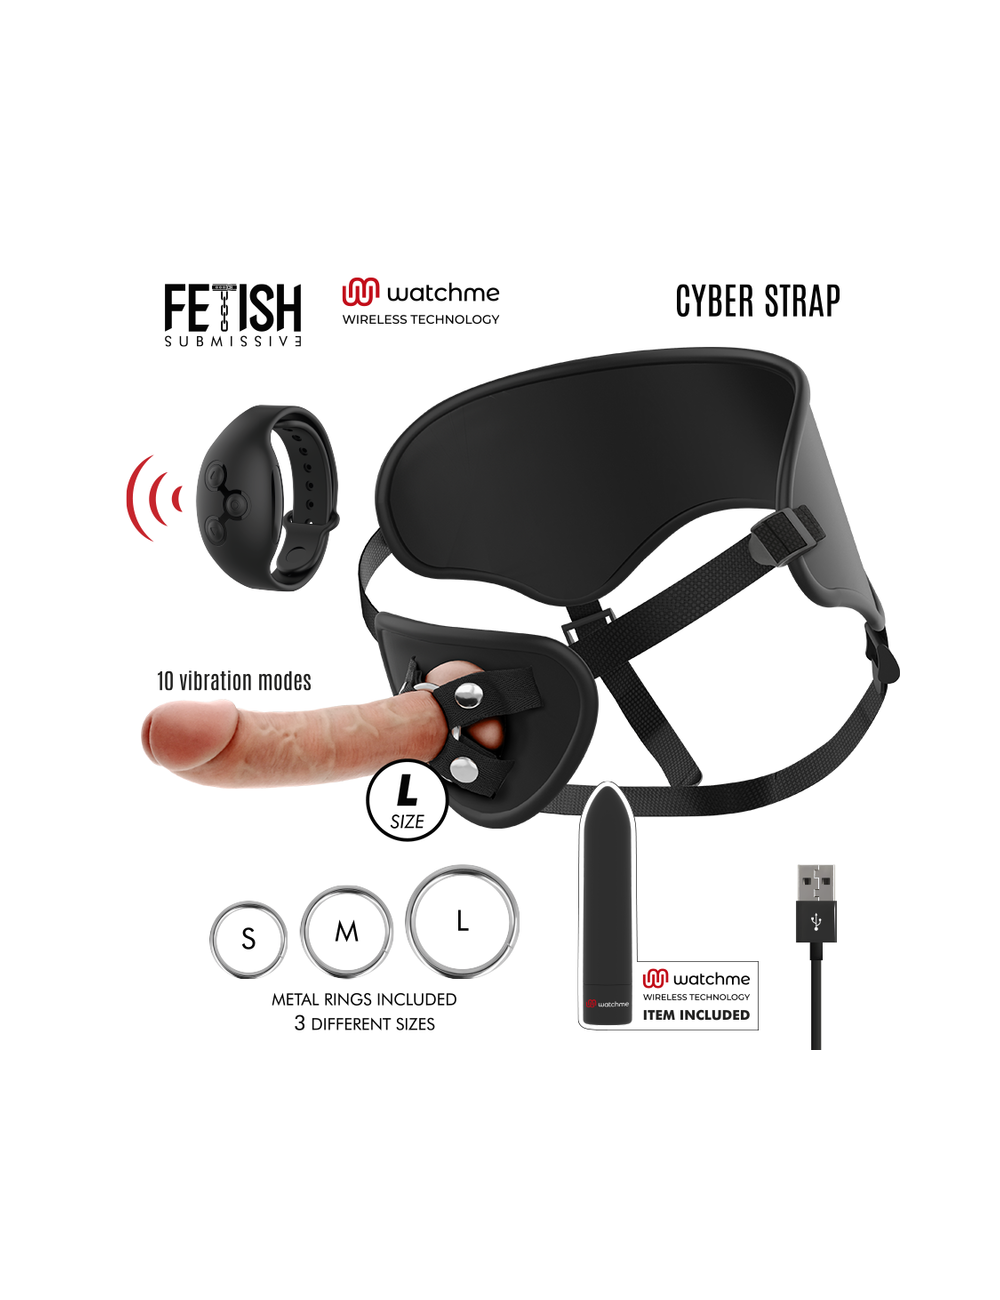 Sextoys - Accessoires - CYBER STRAP REMOTE CONTROL HARNESS AND VIBRATING BULLET WATCME TECHNOLOGY L - FETISH SUBMISSIVE CYBER...